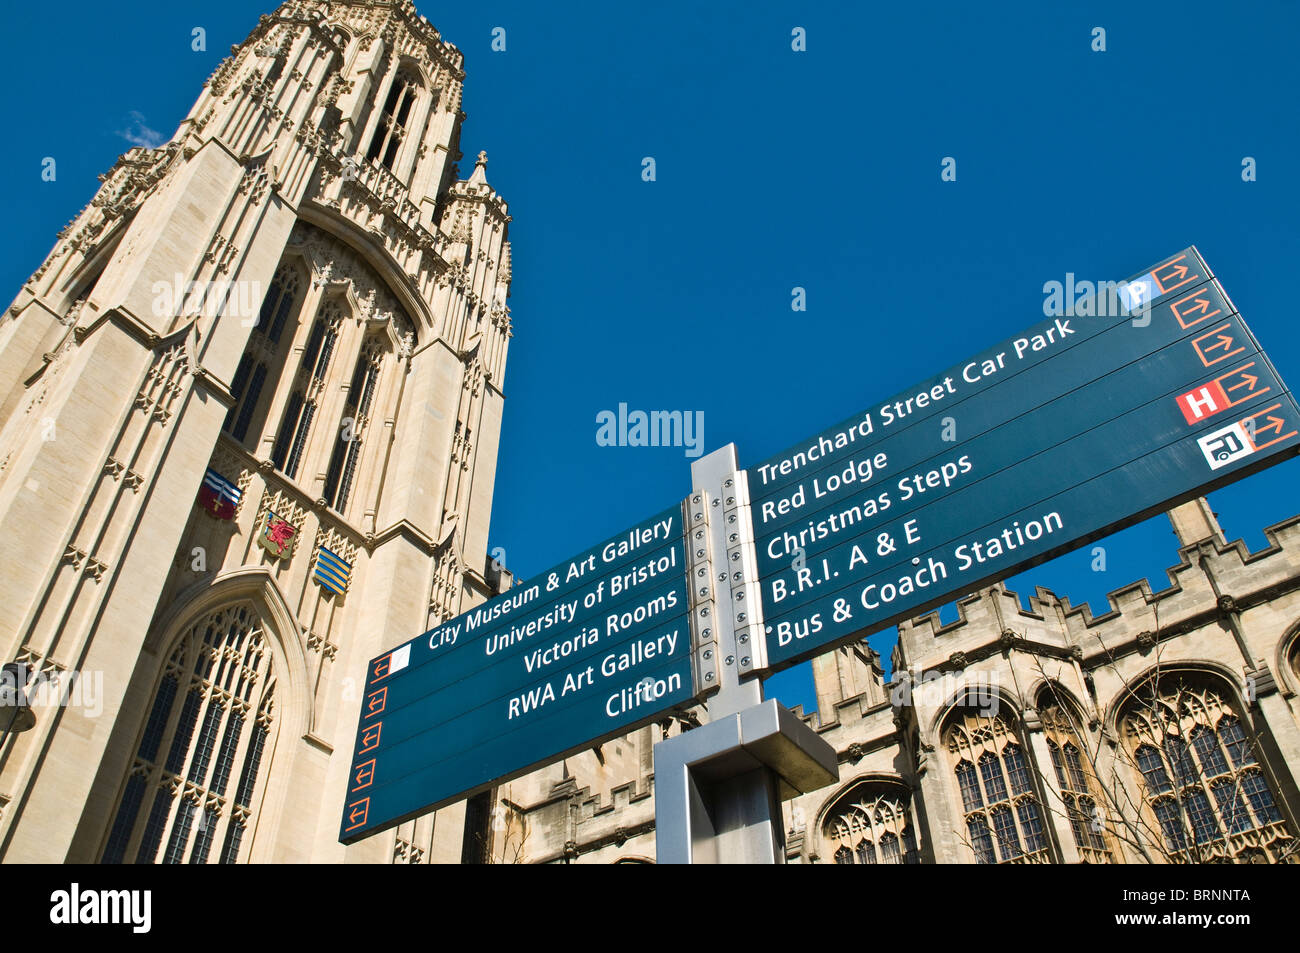 dh English University of Bristol CLIFTON BRISTOL ENGLAND Signpost Wills Memorial Building Gothic tower tourist information post sign uk Stock Photo